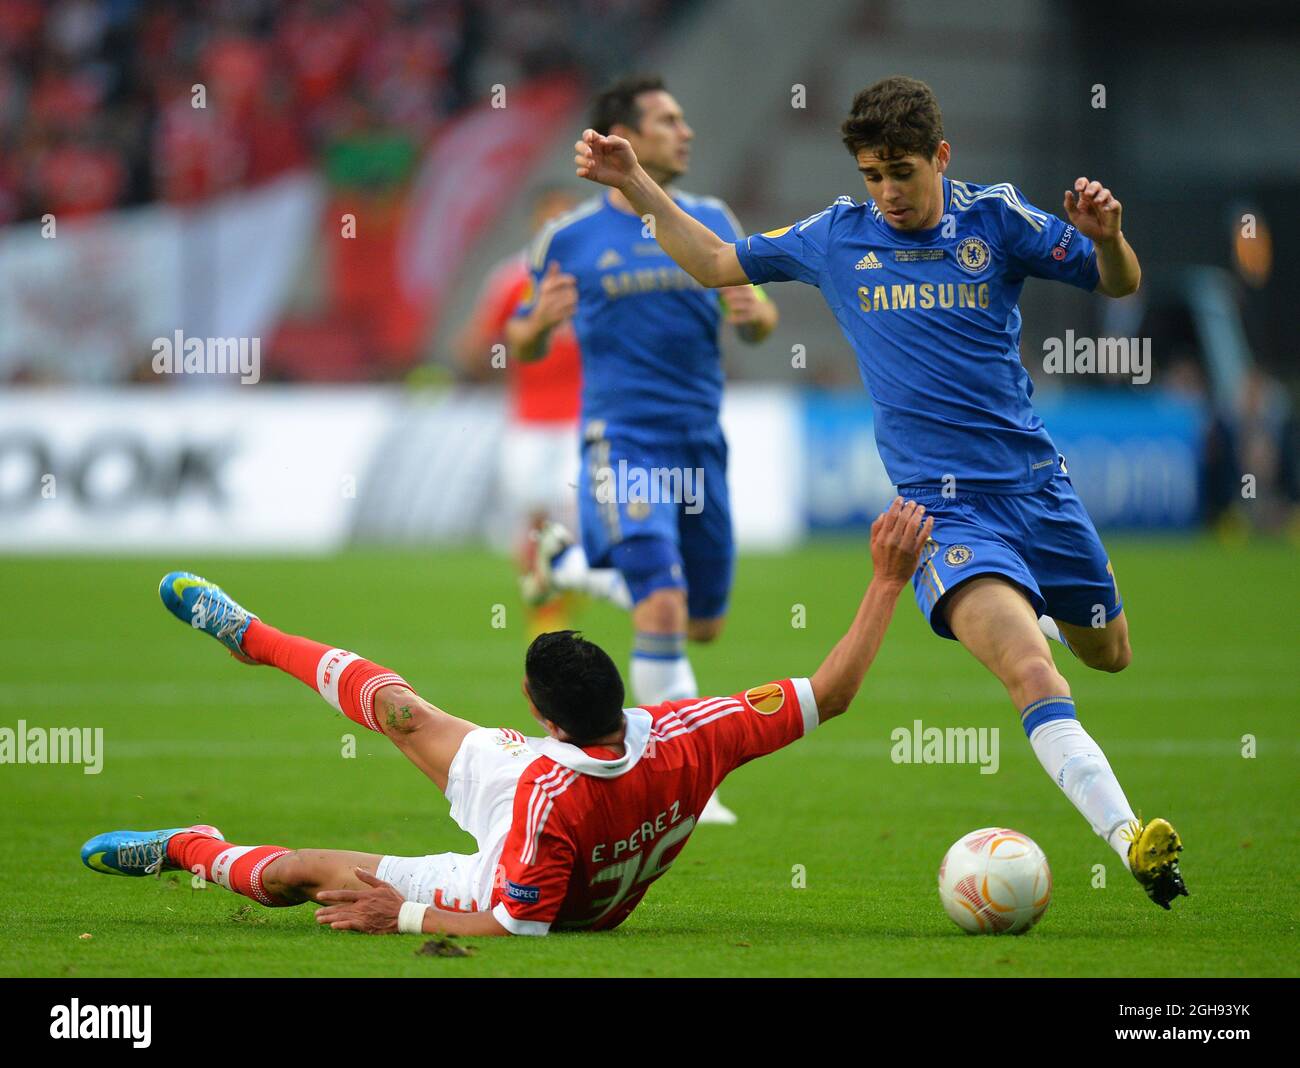 Enzo Perez of SL Benfica tussles with Oscar of Chelsea during the UEFA Europa League Final match between Benfica and Chelsea at the Amsterdam Arena in Amsterdam, Netherlands on May 15, 2013. Picture Simon Bellis Stock Photo